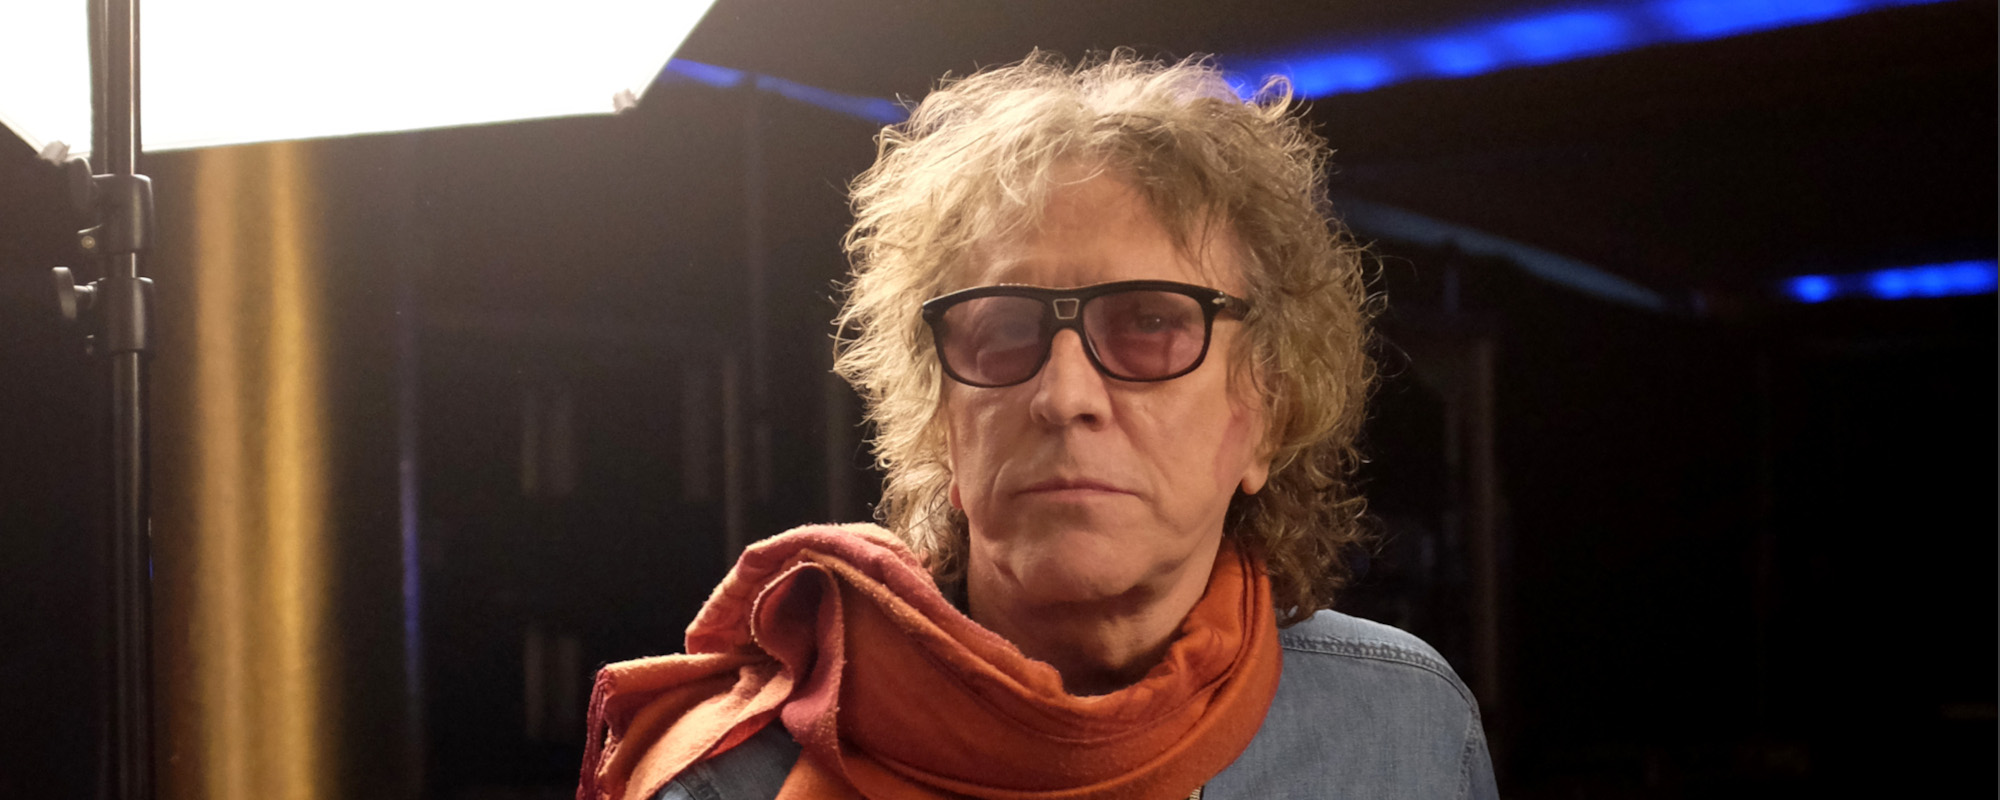 Mick Rock, Photographer of Bowie, Queen, the Velvet Underground, and More Dies at 72